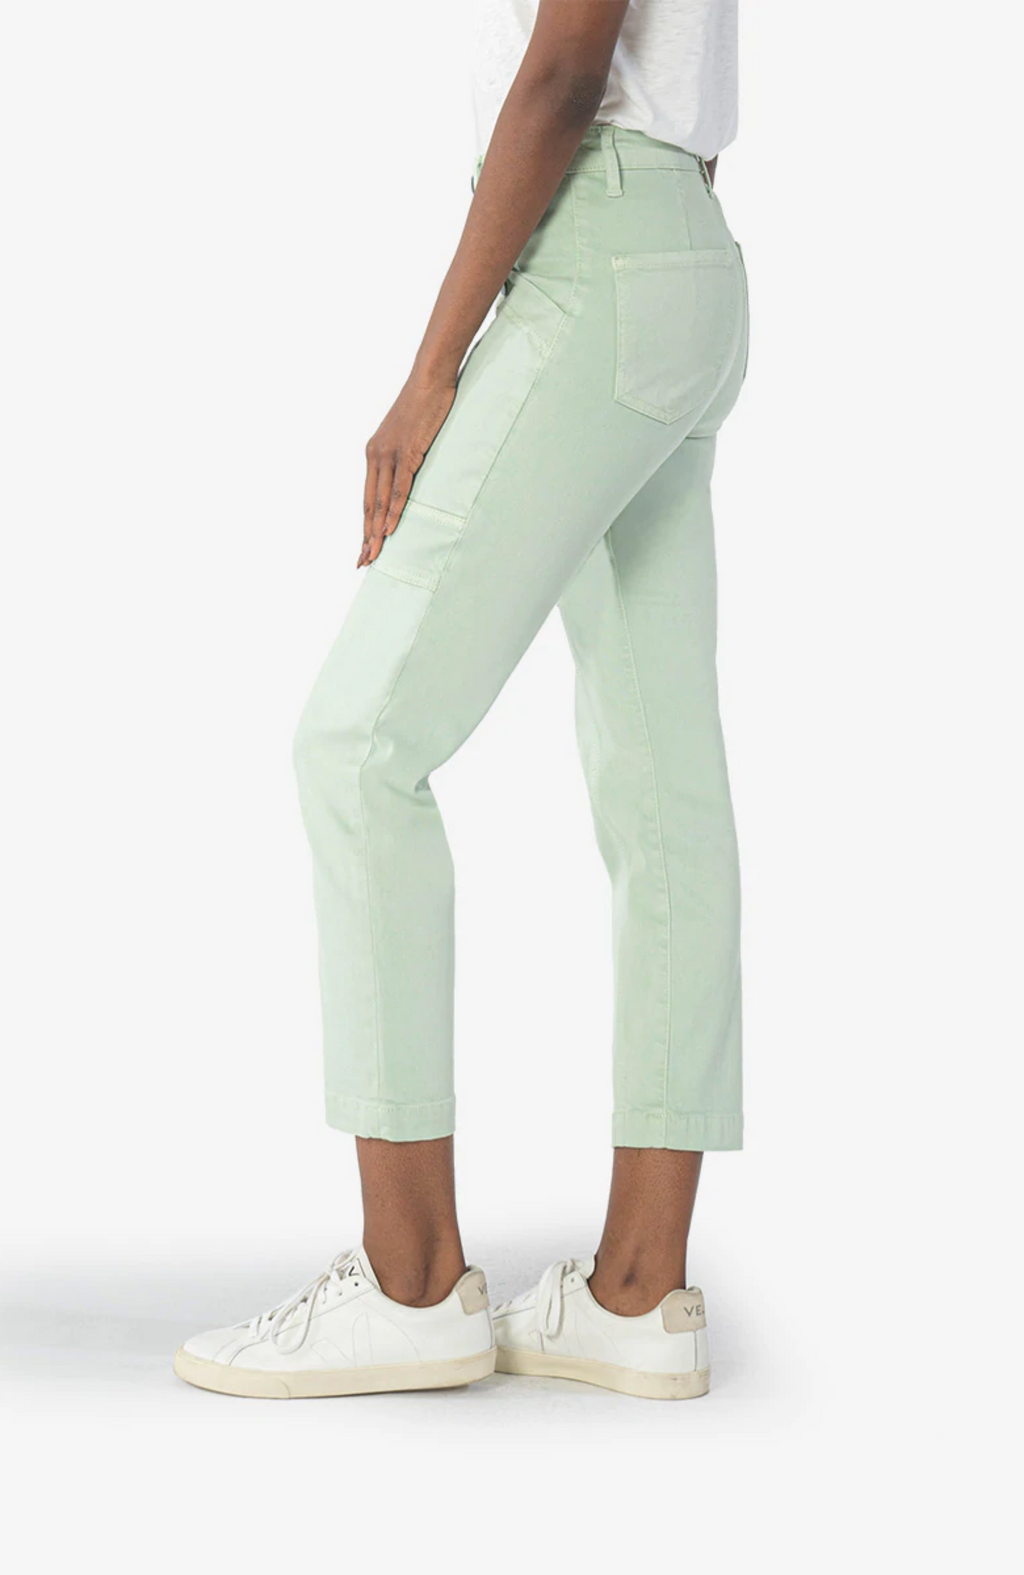 Kut from the Kloth - Rachael High Rise Jeans